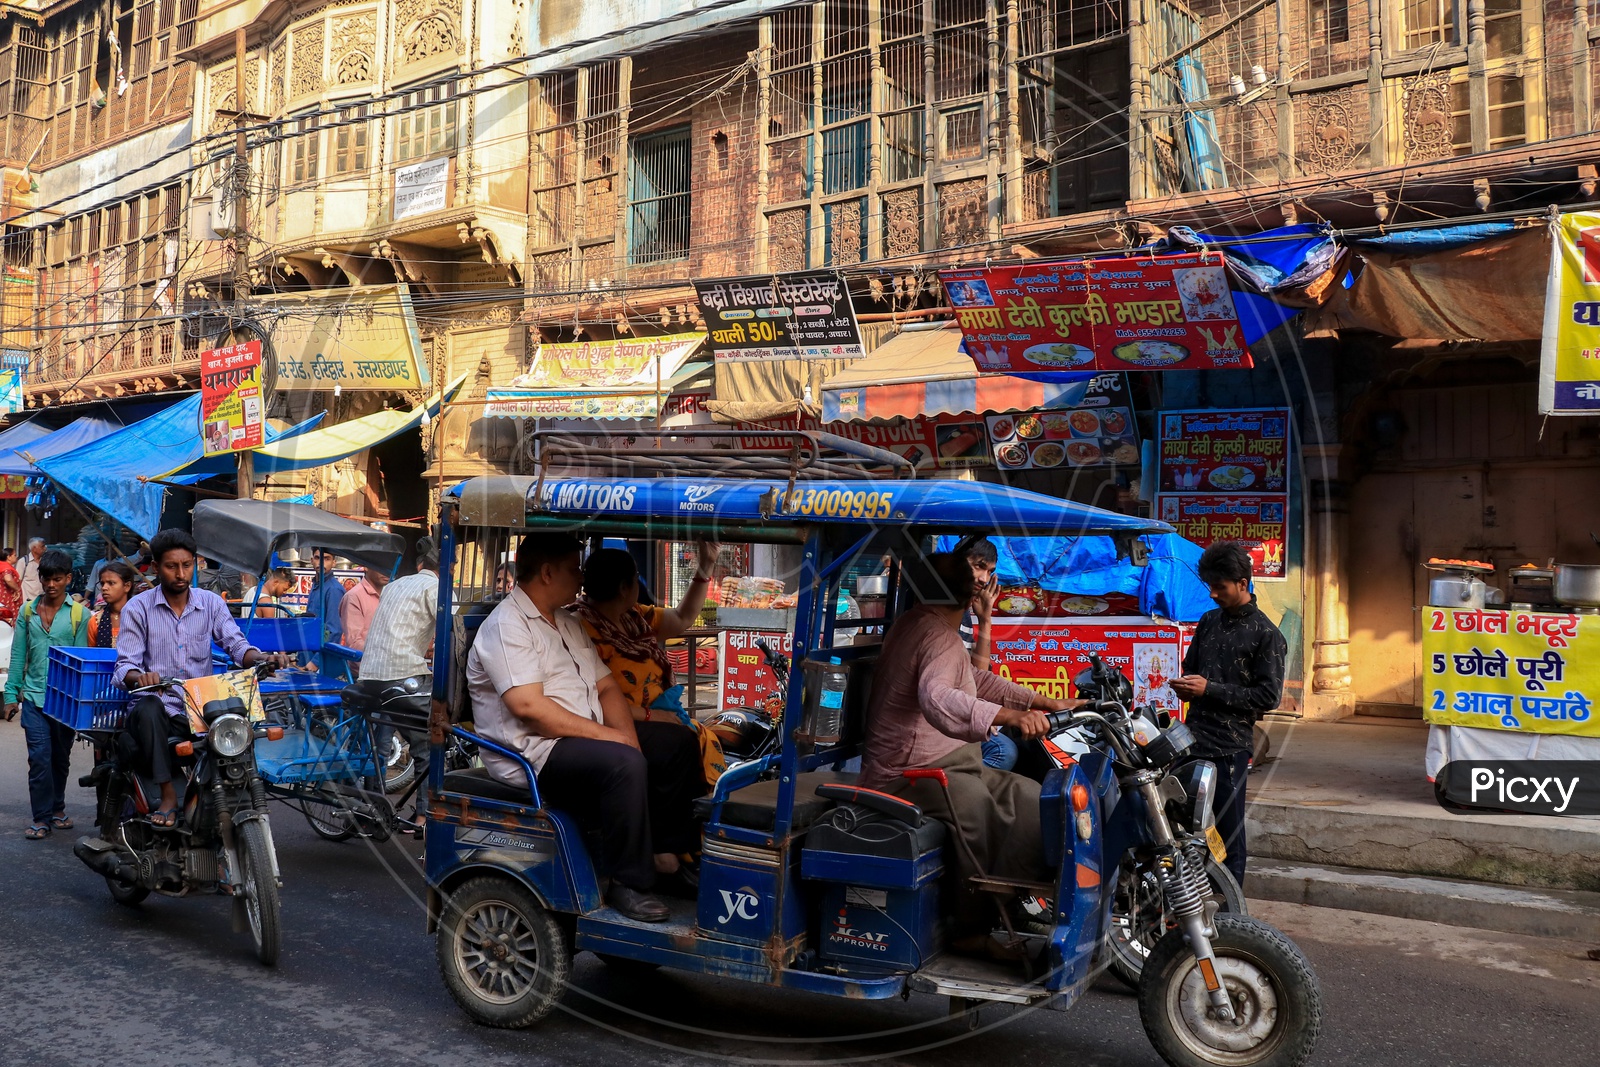 Electric auto rickshaw in the streets of Haridwar